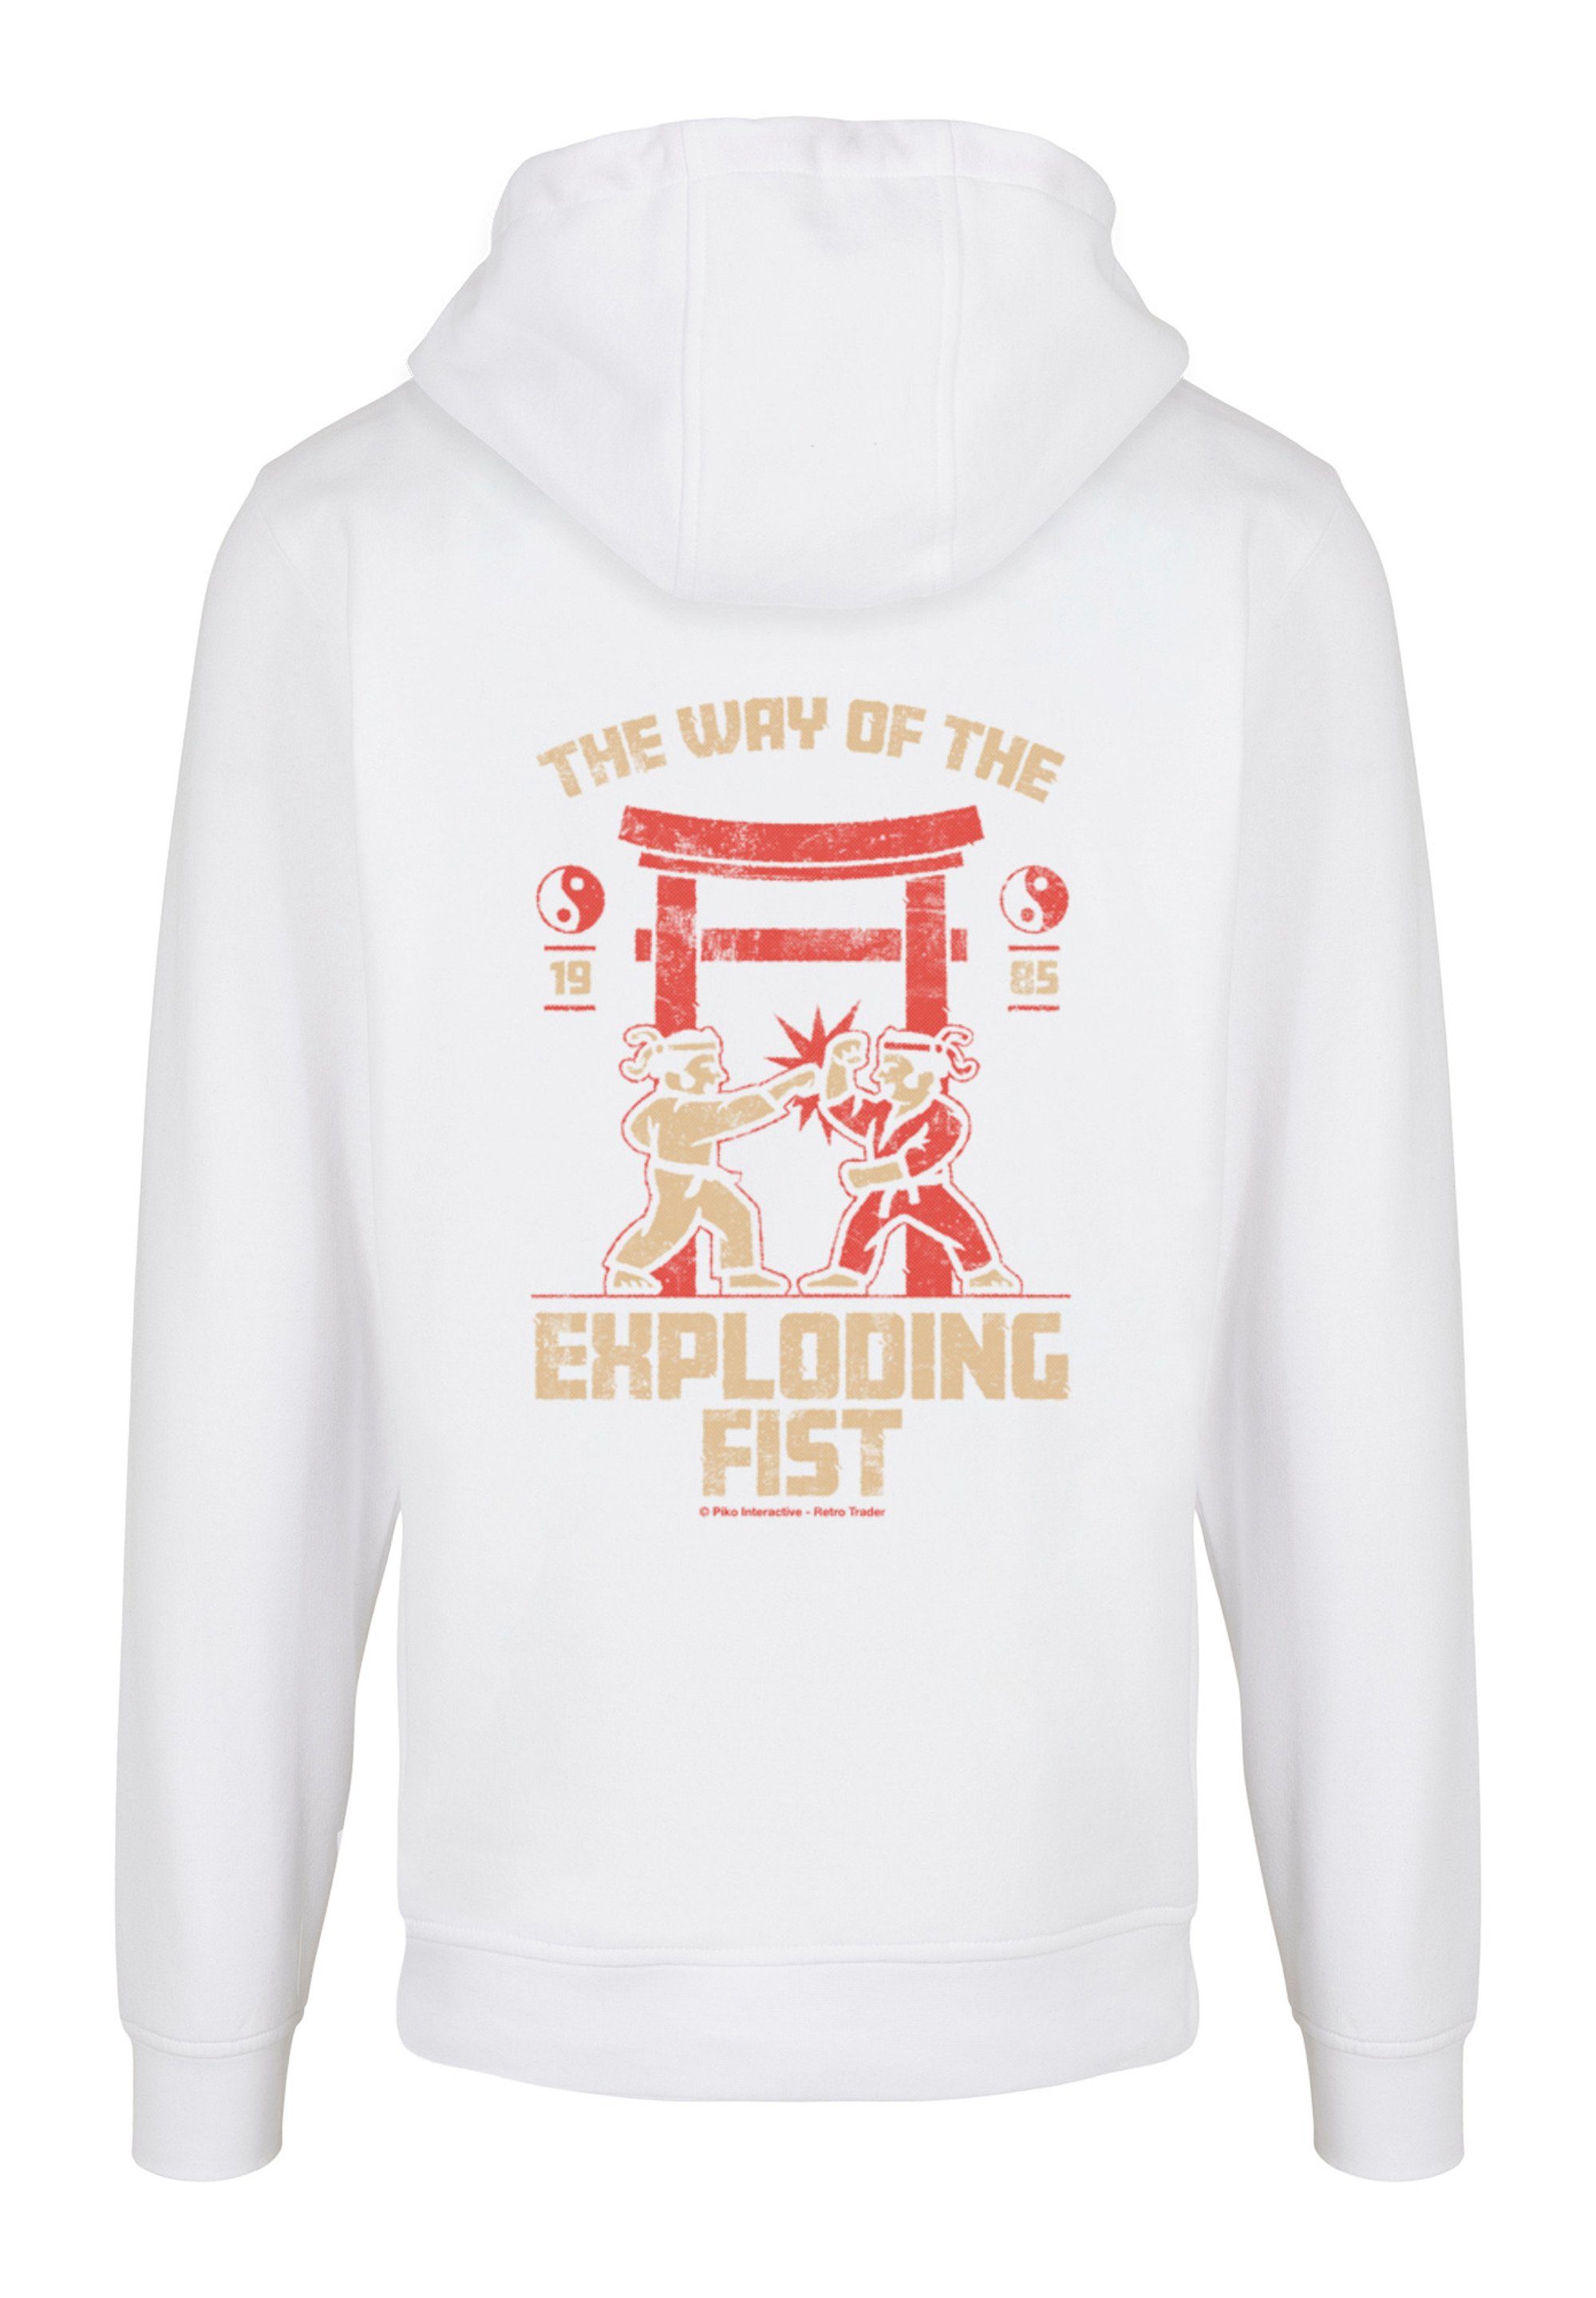 Exploding Kapuzenpullover Print The F4NT4STIC the Way Retro of Gaming weiß Fist